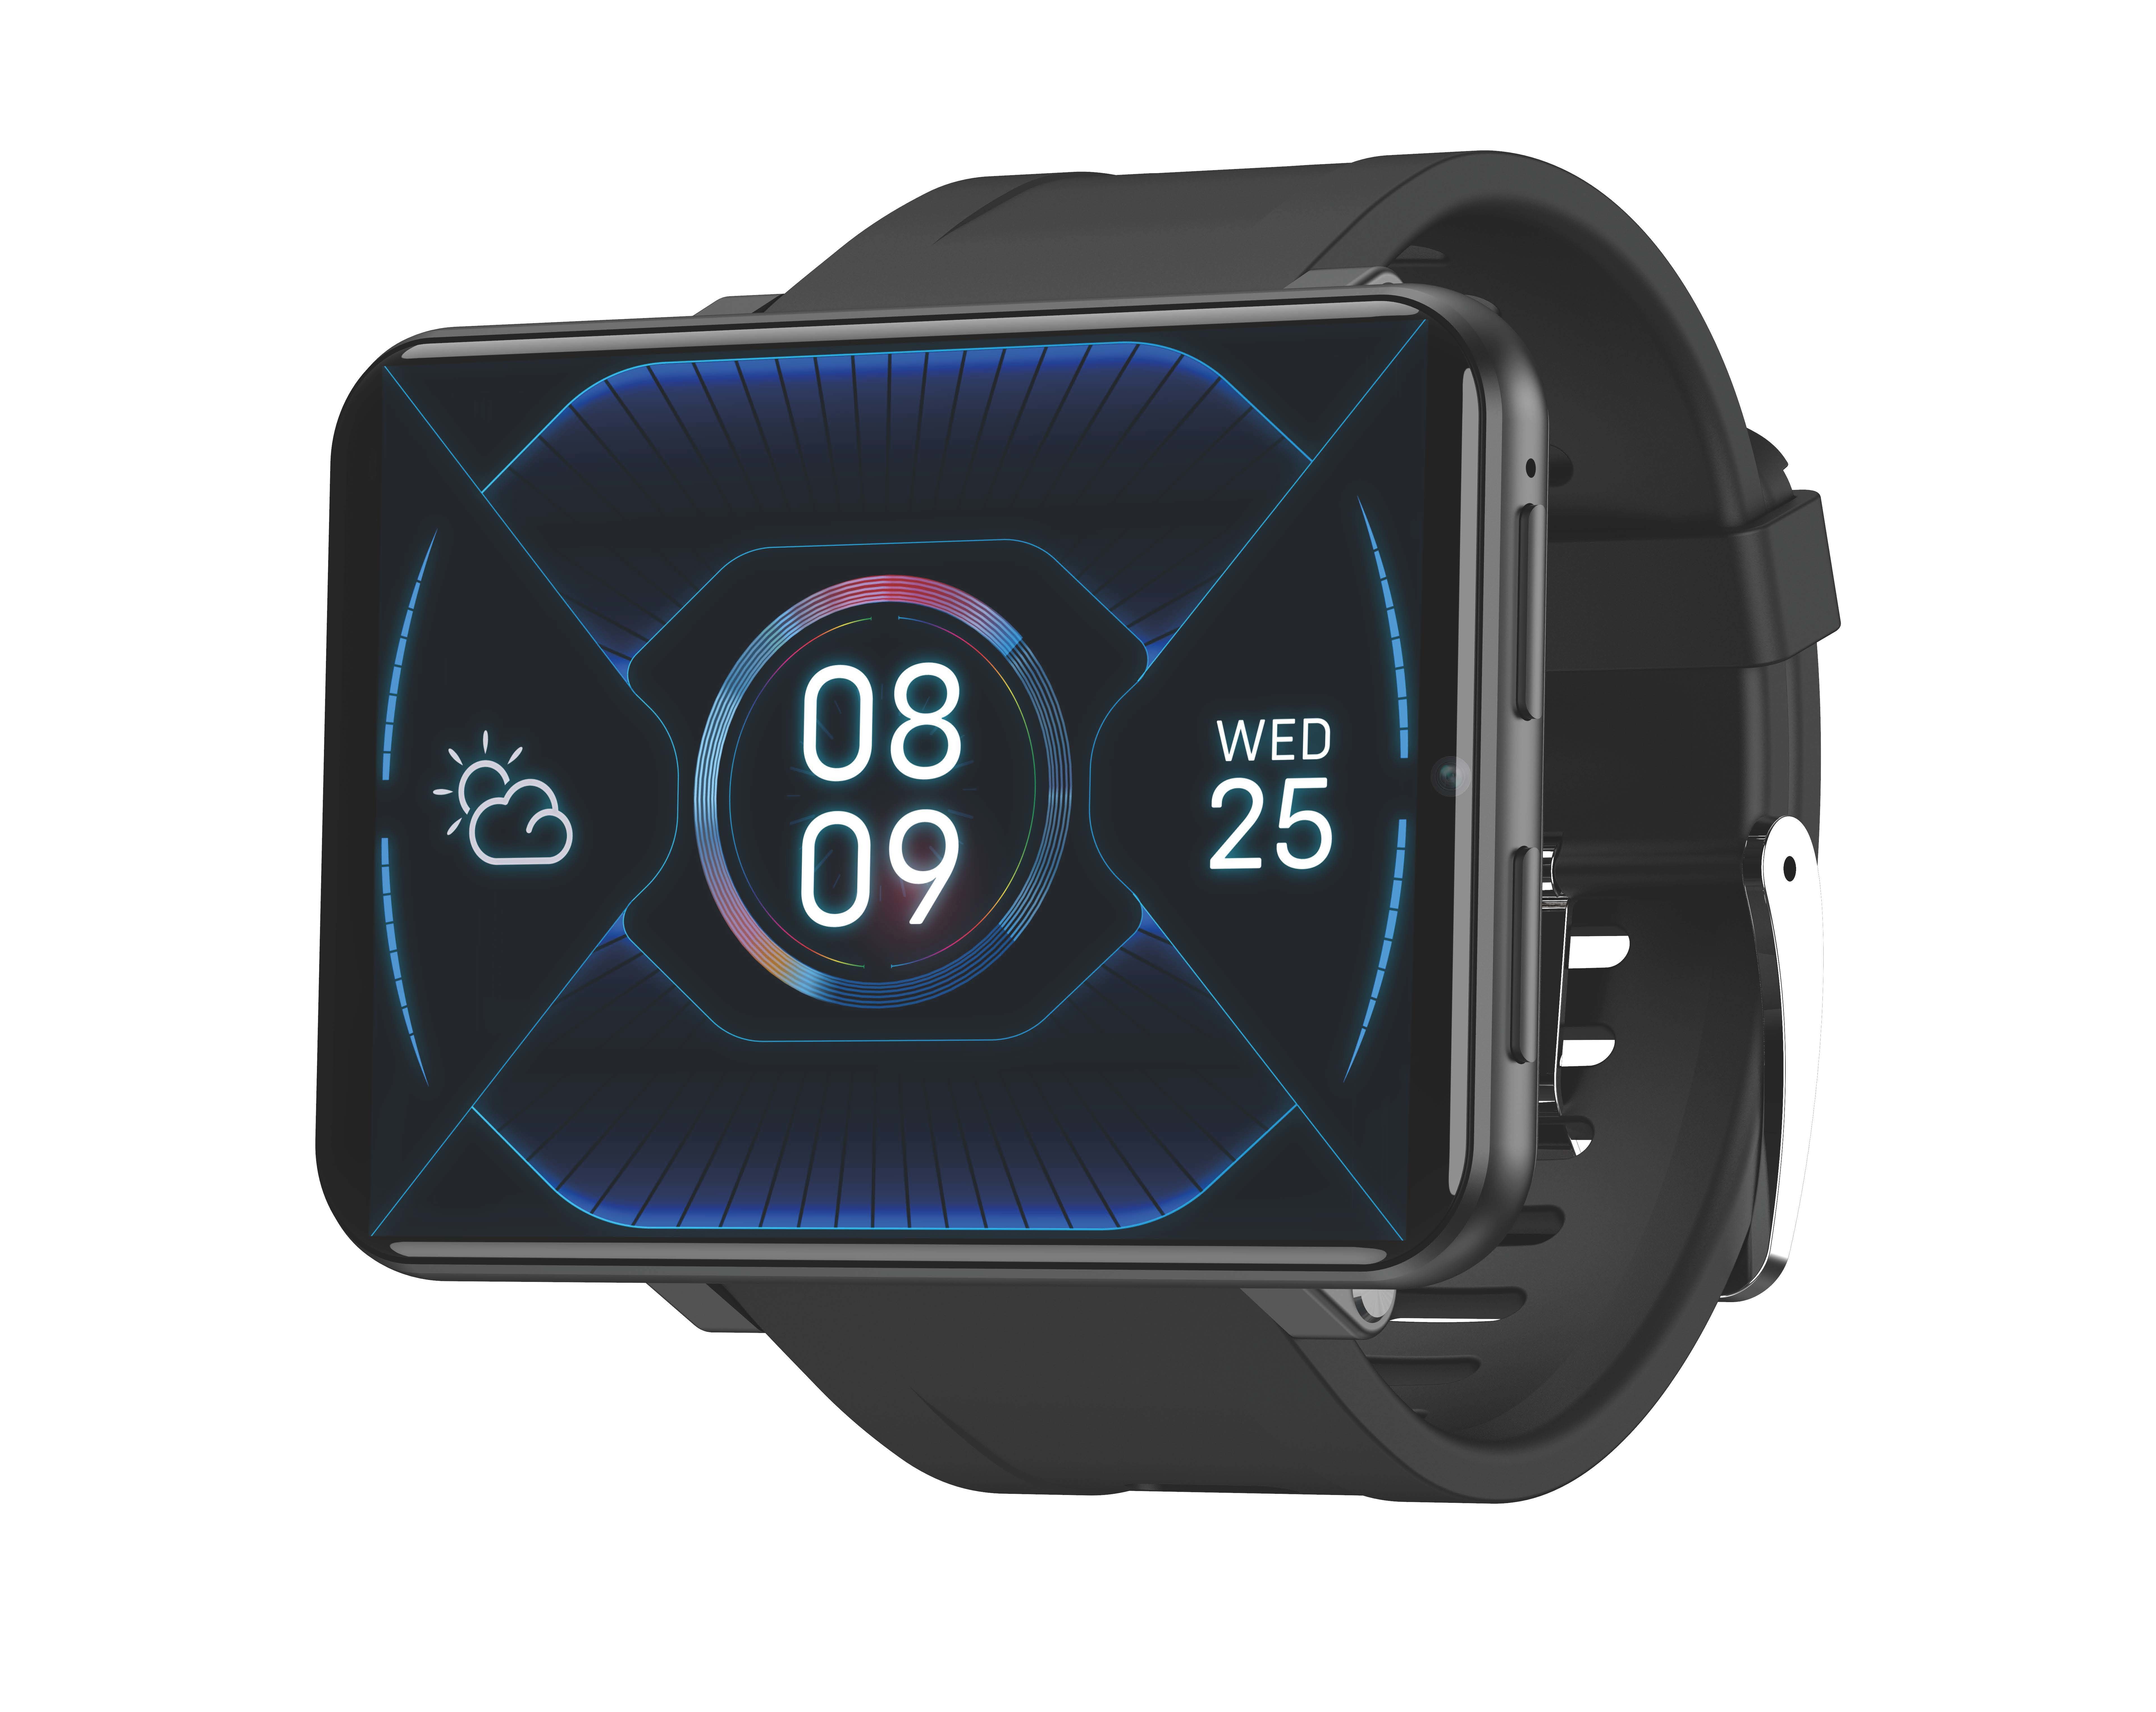  4G 5G Wifi Bluetooth ODM 4G 2.8" GPS Tracking Smartwatch Manufactures